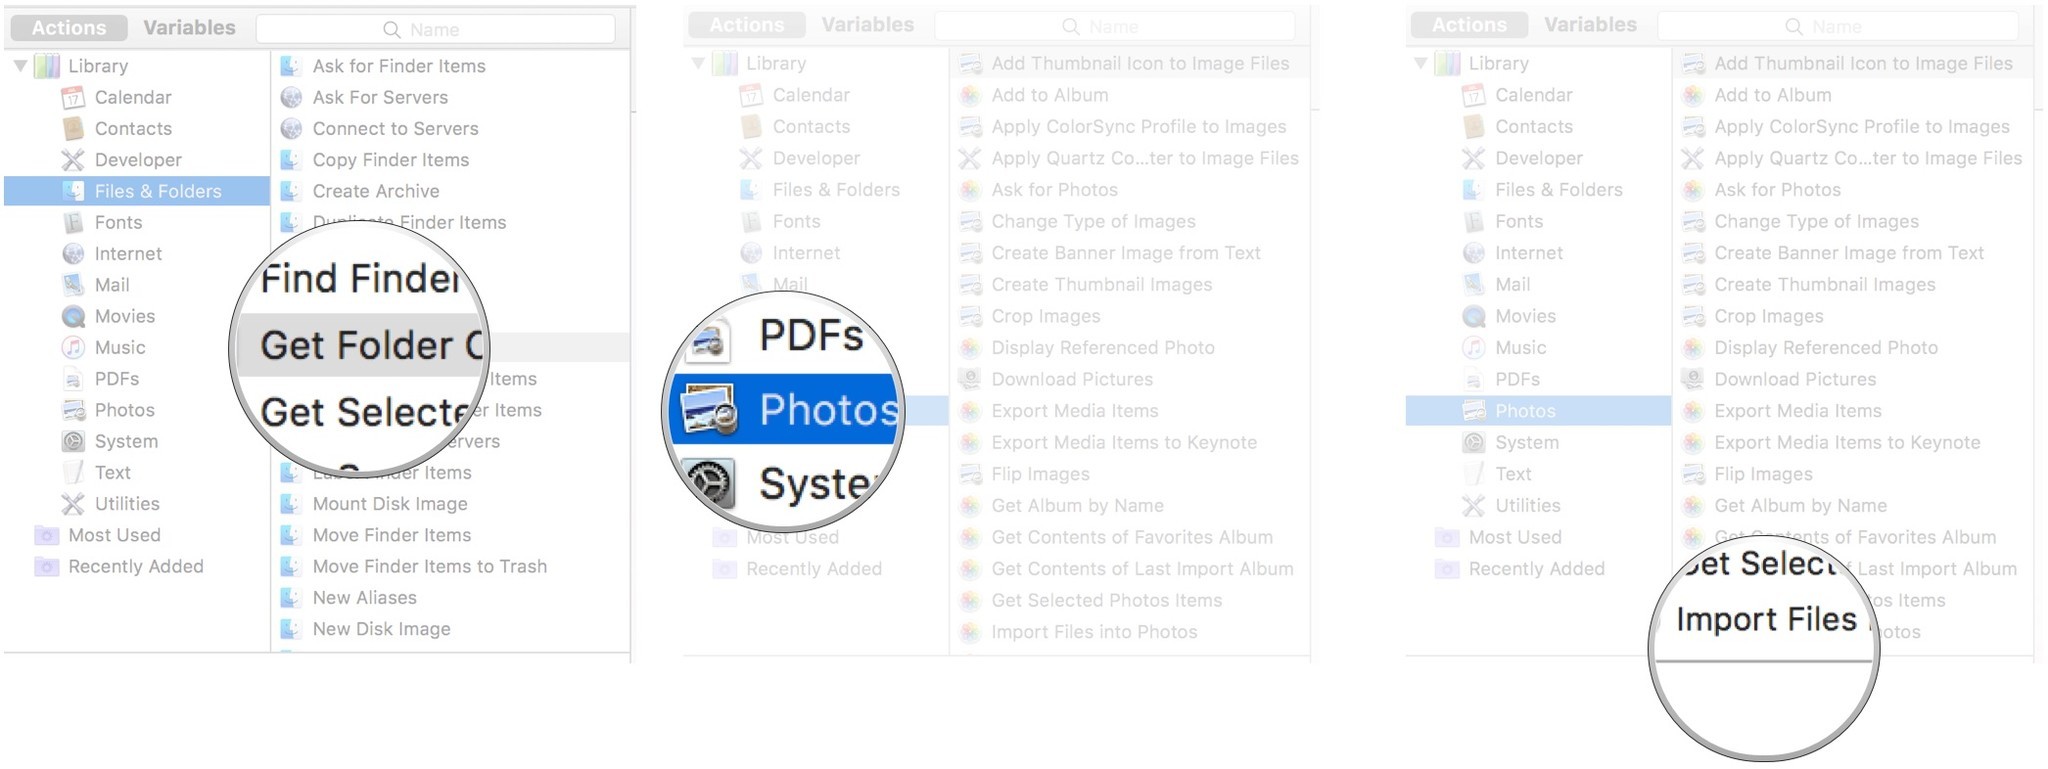 Double-click on get folder contents, click on Photos, double-click Import Files into Photos